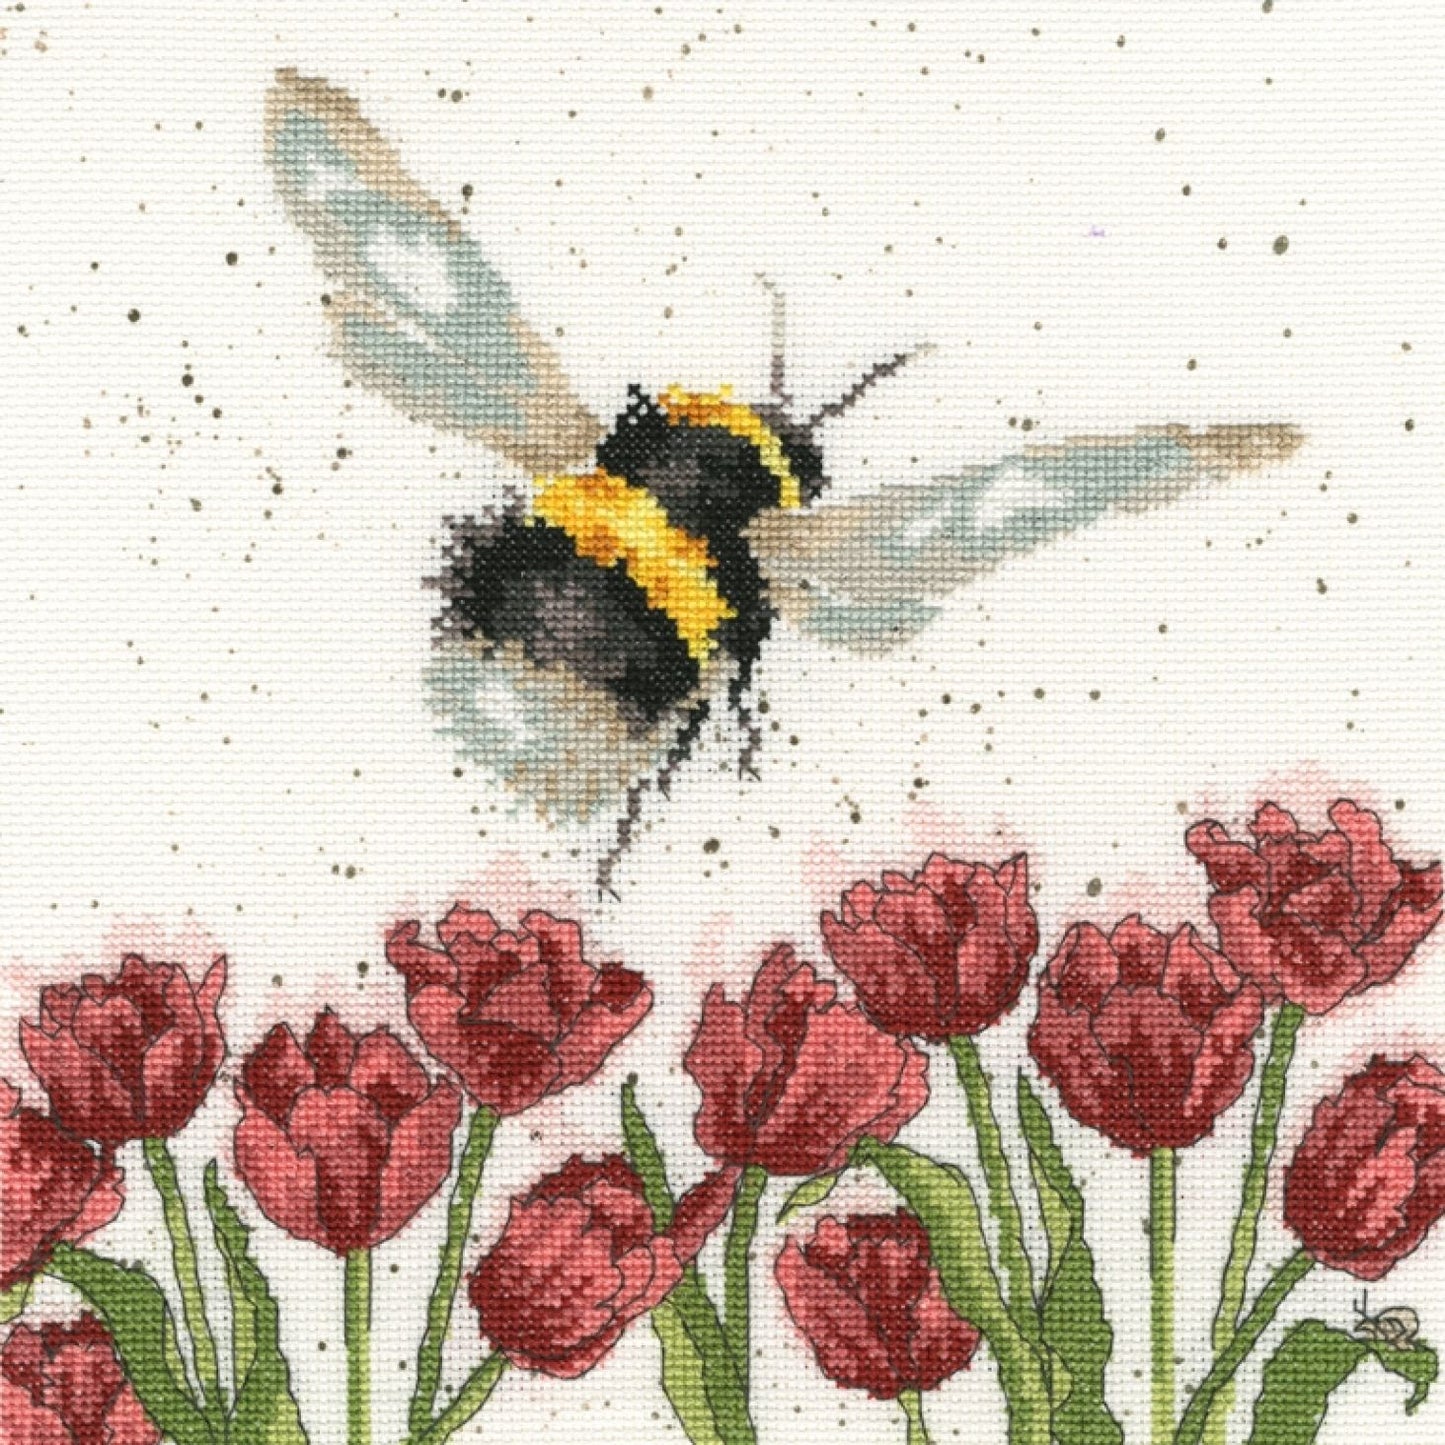 Flight of the Bumblebee - Counted Cross Stitch Kit by Bothy Threads